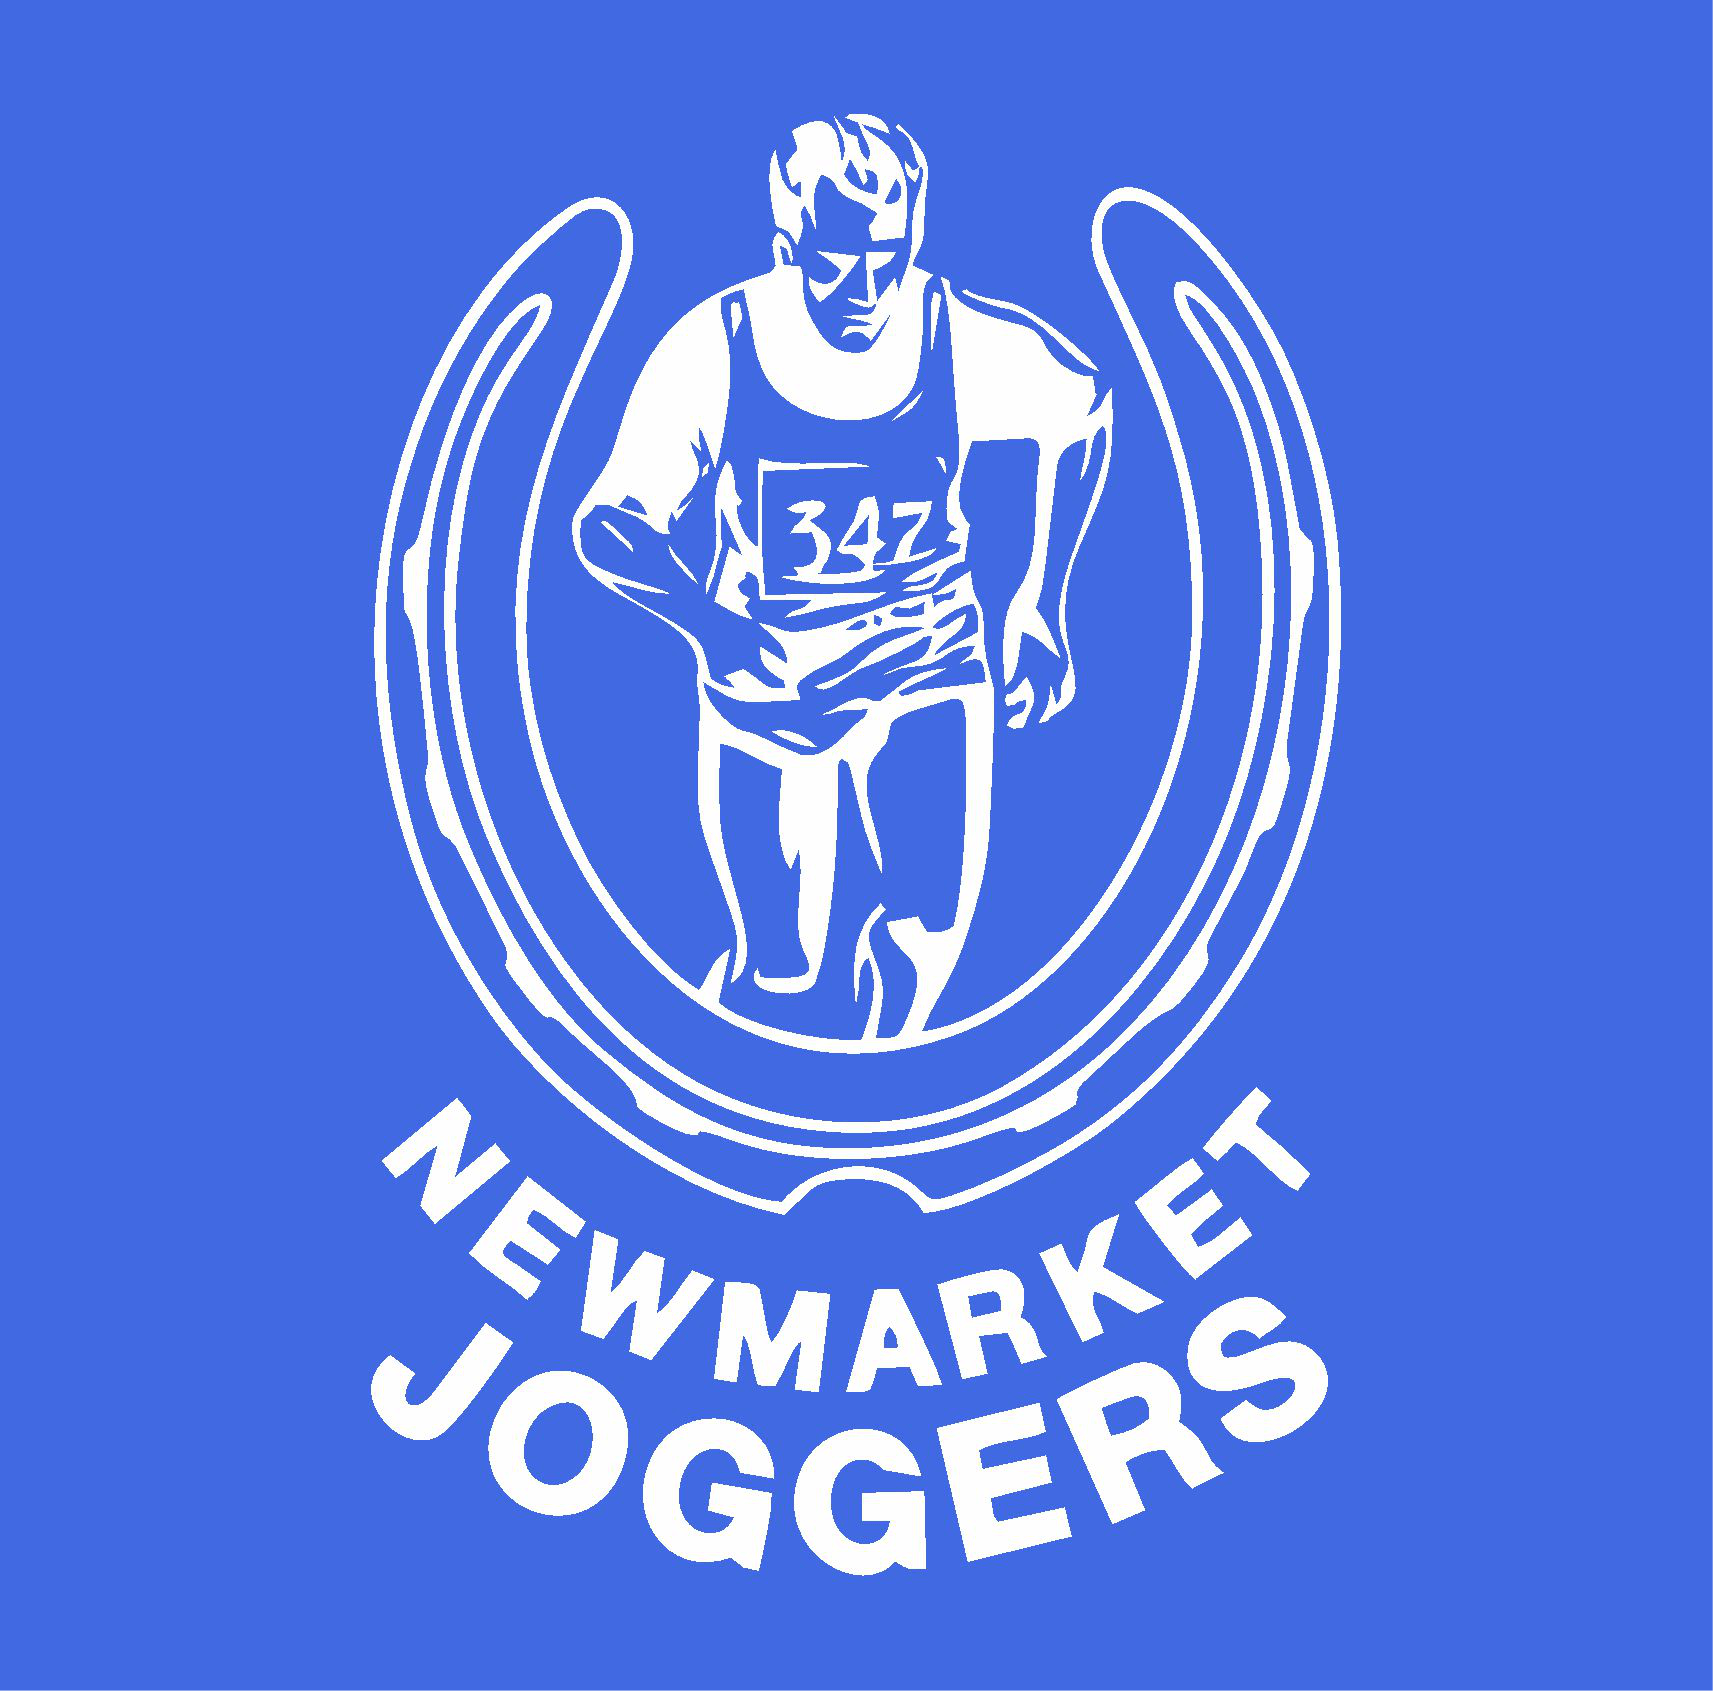 Newmarket Joggers logo sigma embroidery